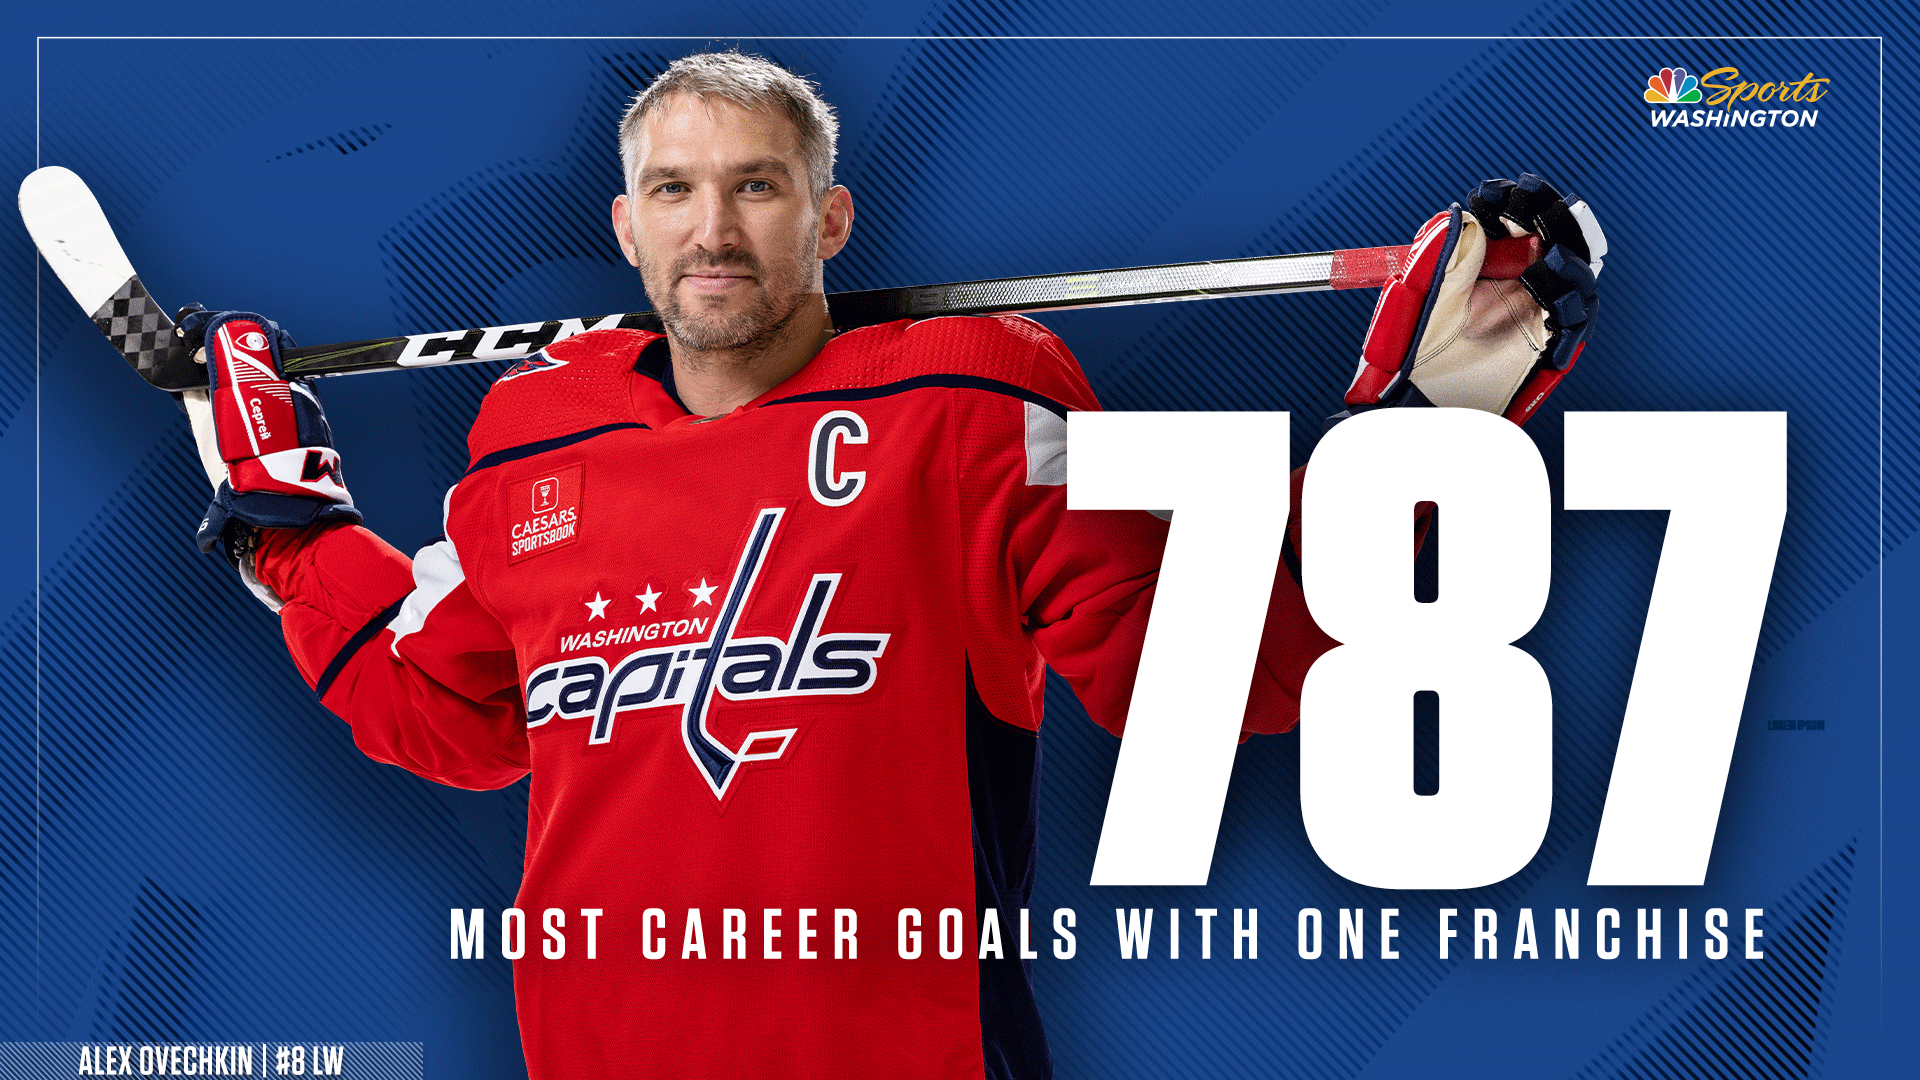 Alex Ovechkin passes Gordie Howe for most goals scored with one team